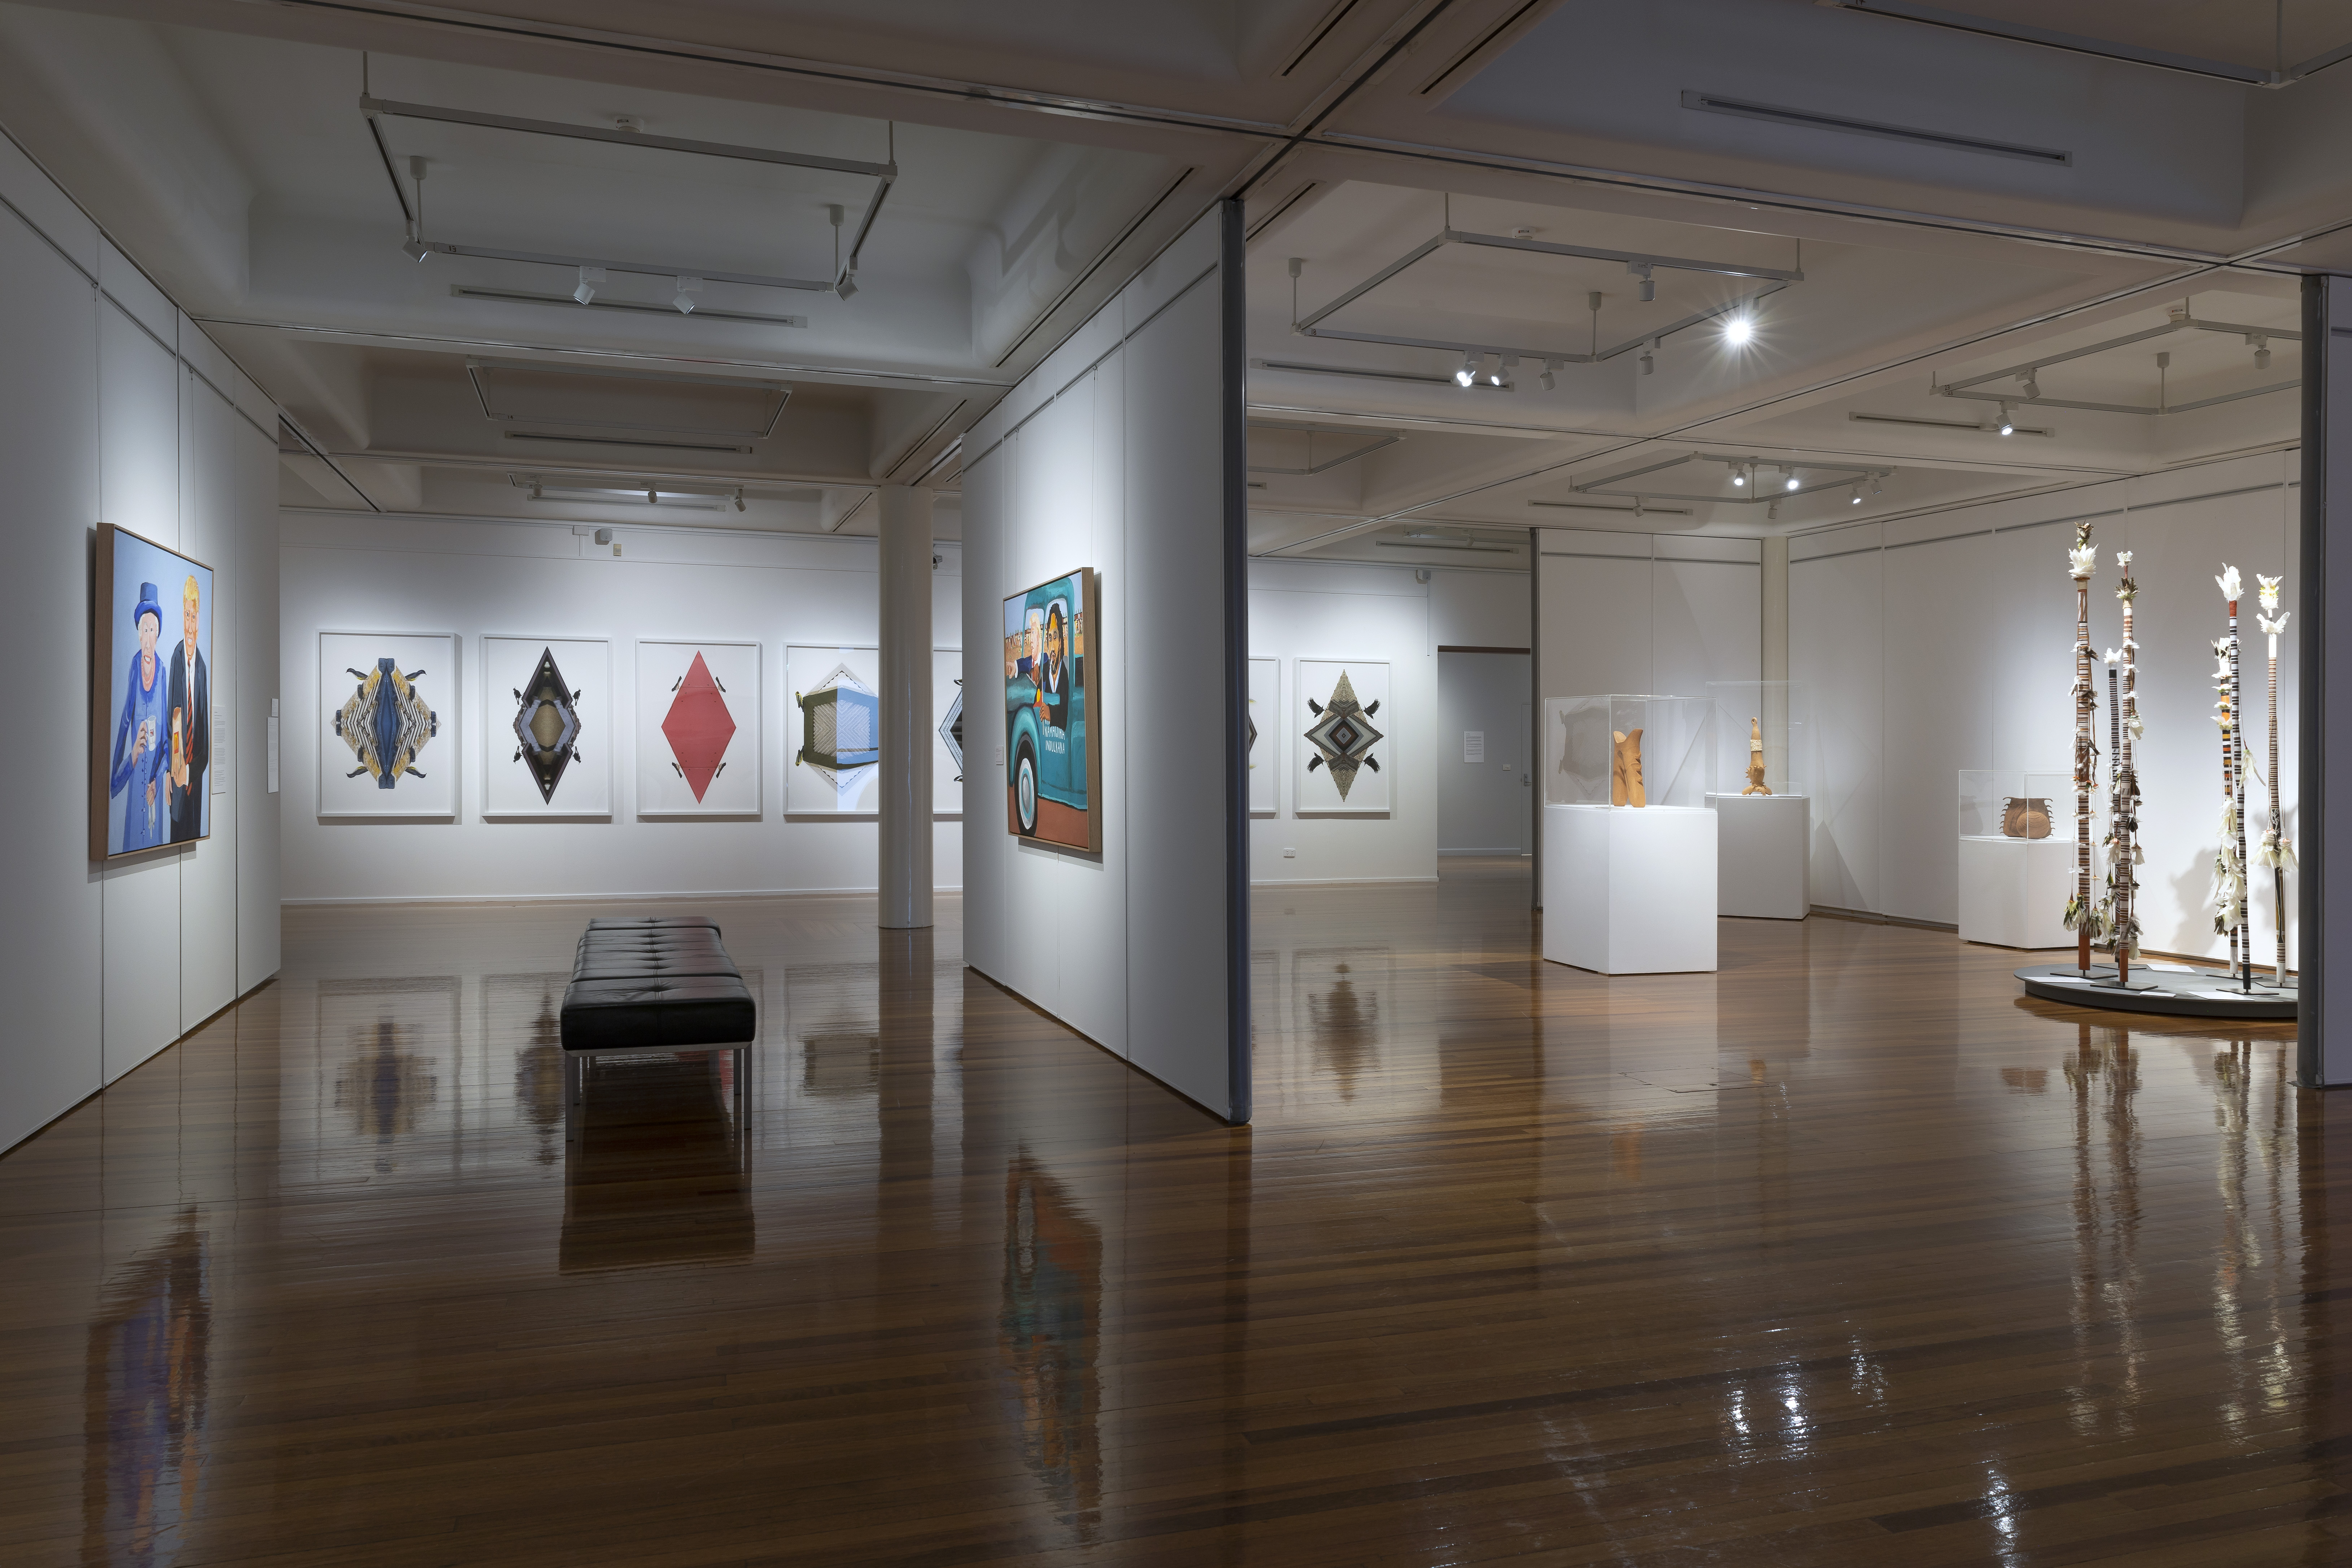 Celebrating Culture: Contemporary Indigenous Art exhibition installation view, Glen Eira City Council Gallery, 2 May – 28 July 2019.